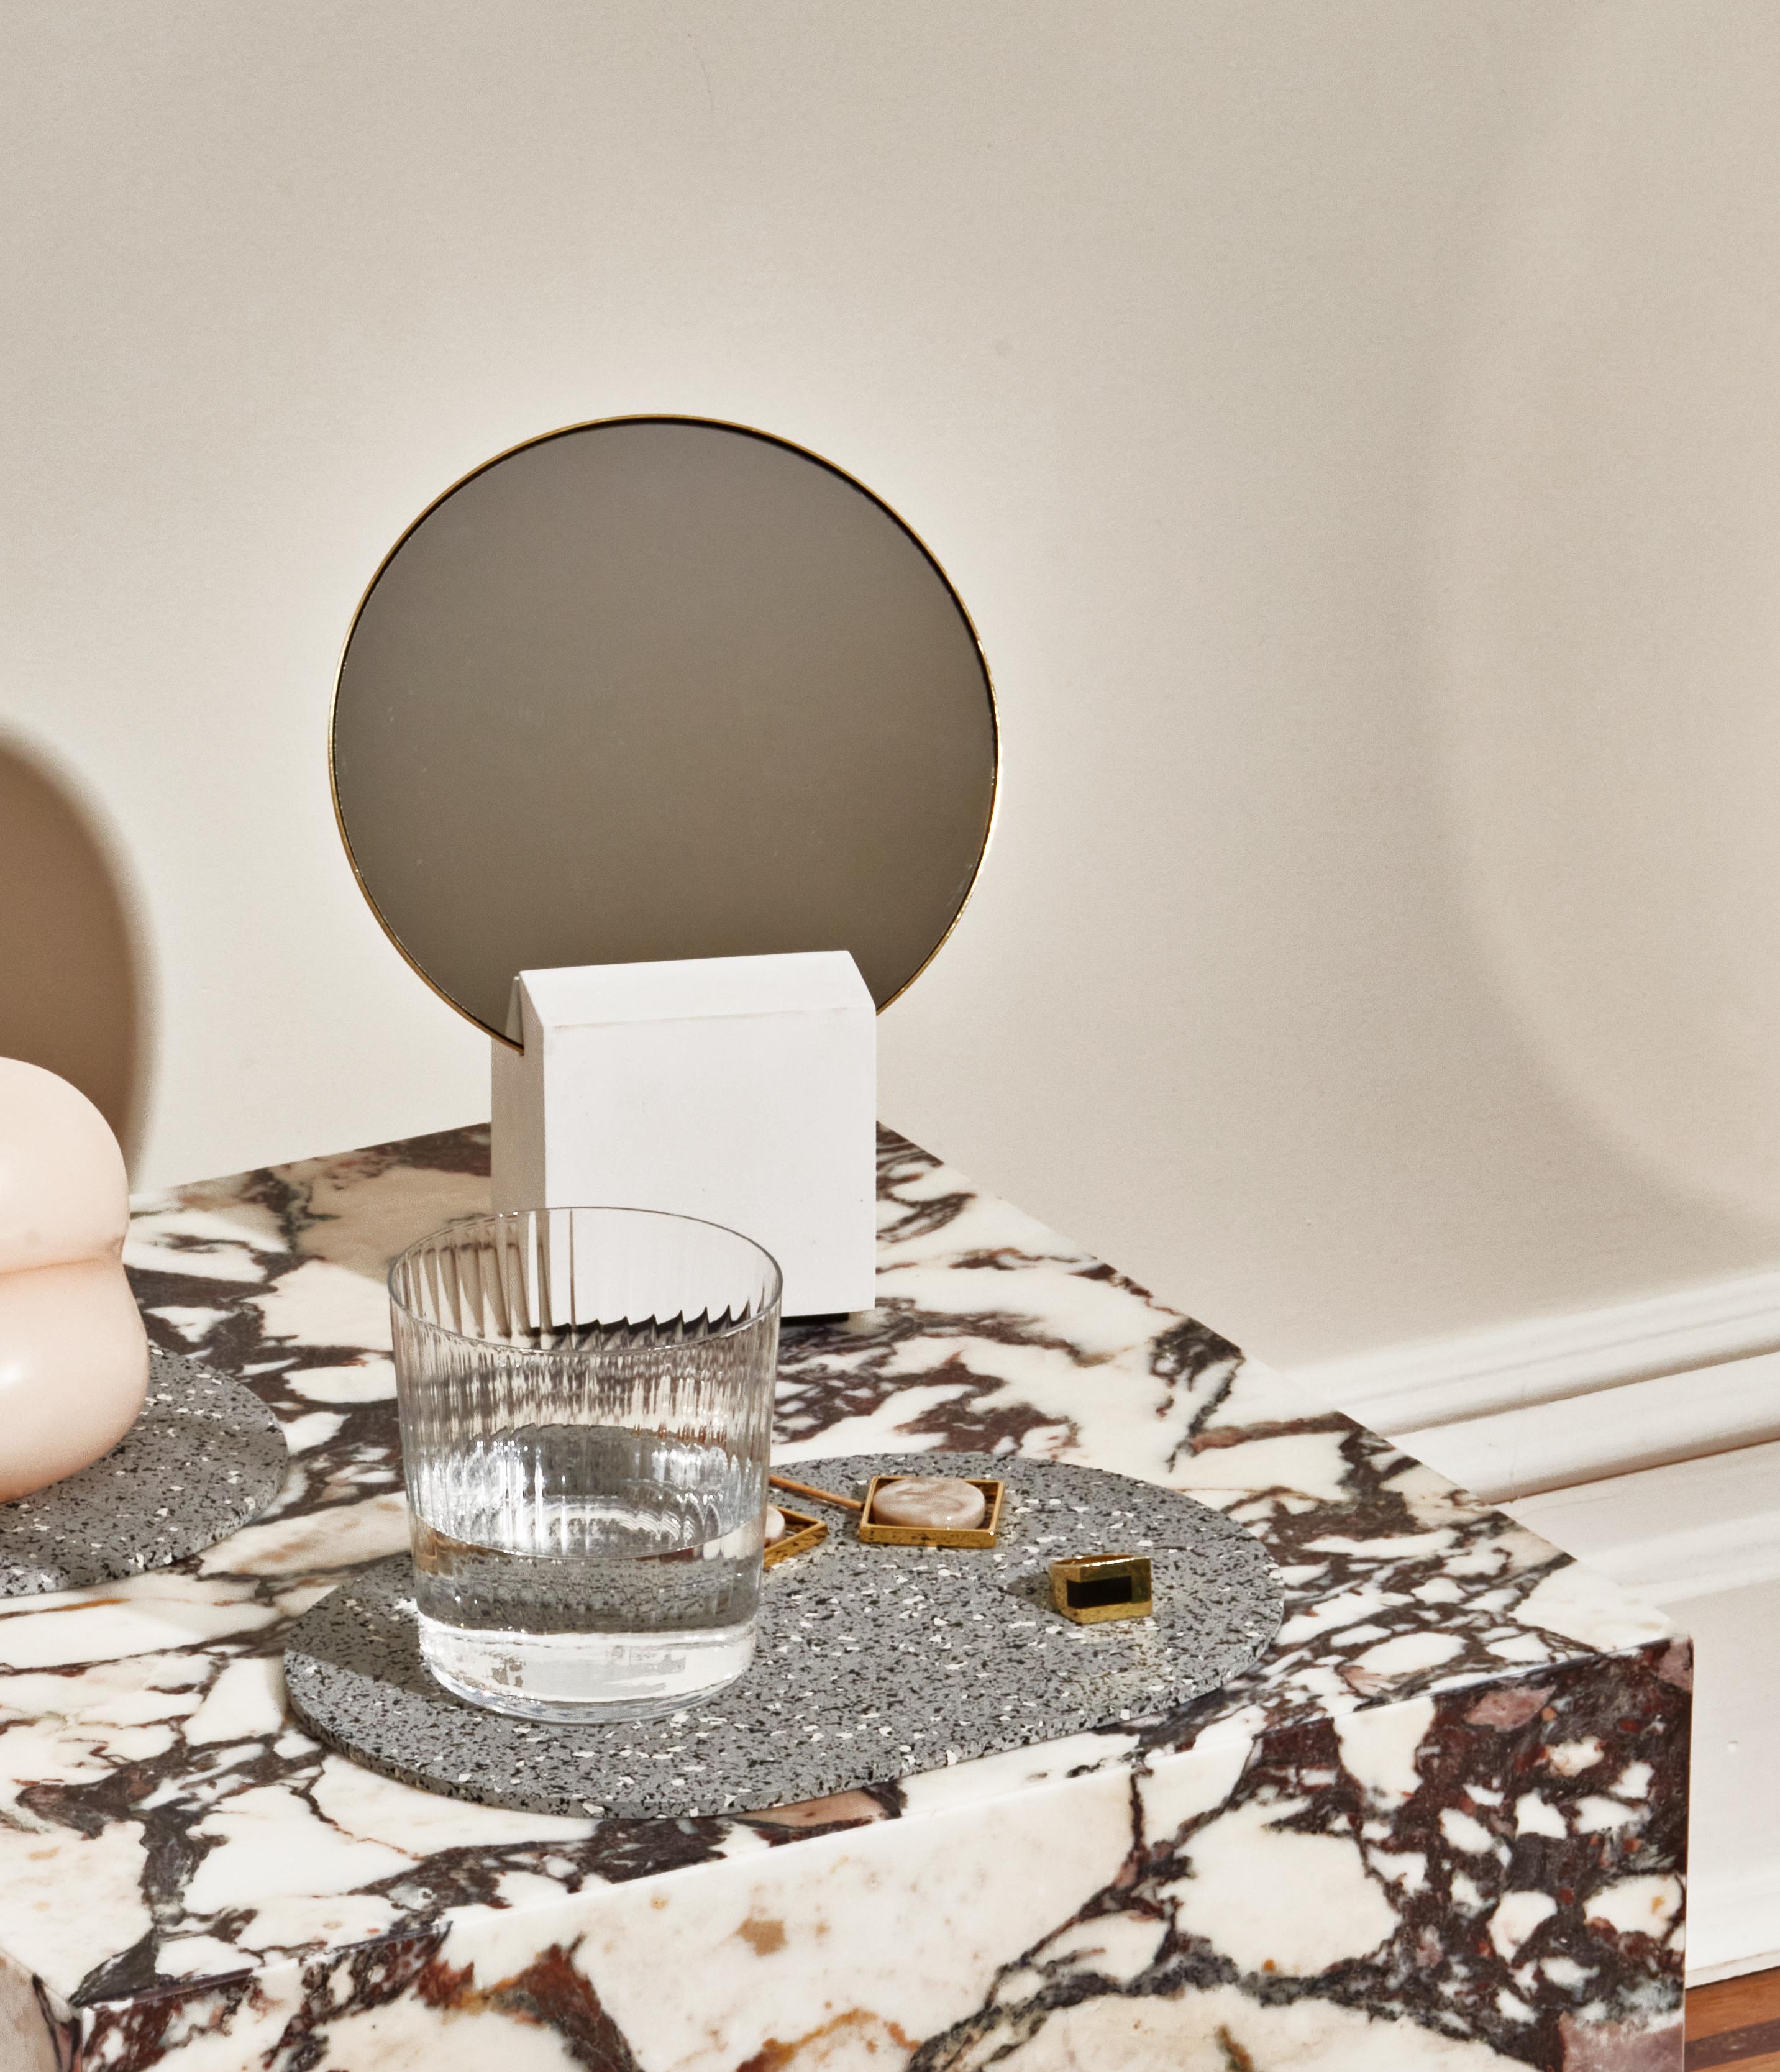 The Vanity mirror consists of a hand-cast white cube base with a removable round mirror, edged with a brass frame. 

Circular mirror with brass edging intersects with the hand-cast cube, showcasing the versatility of its materials. The rubber